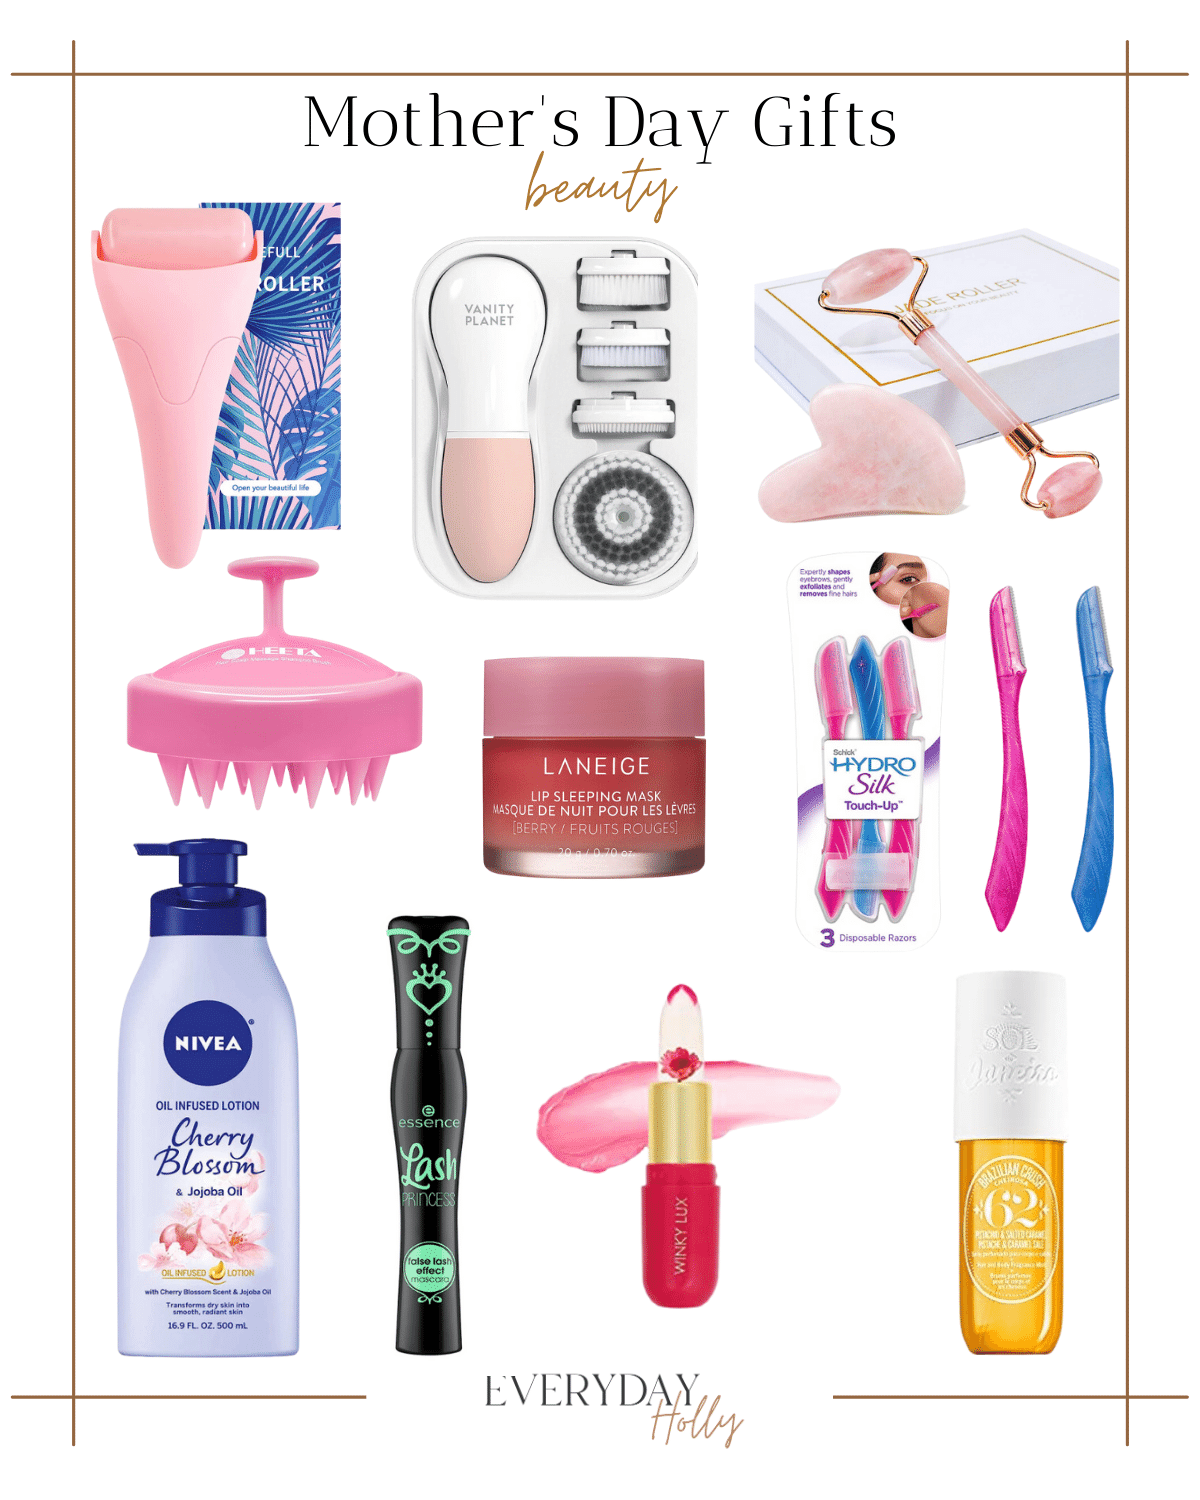 Mother's day gifts, beauty, ice roller, beauty essentials, lotion, lip mask, head scrubber, face cleansing brush, mascara, vitamin c serum, body spray 